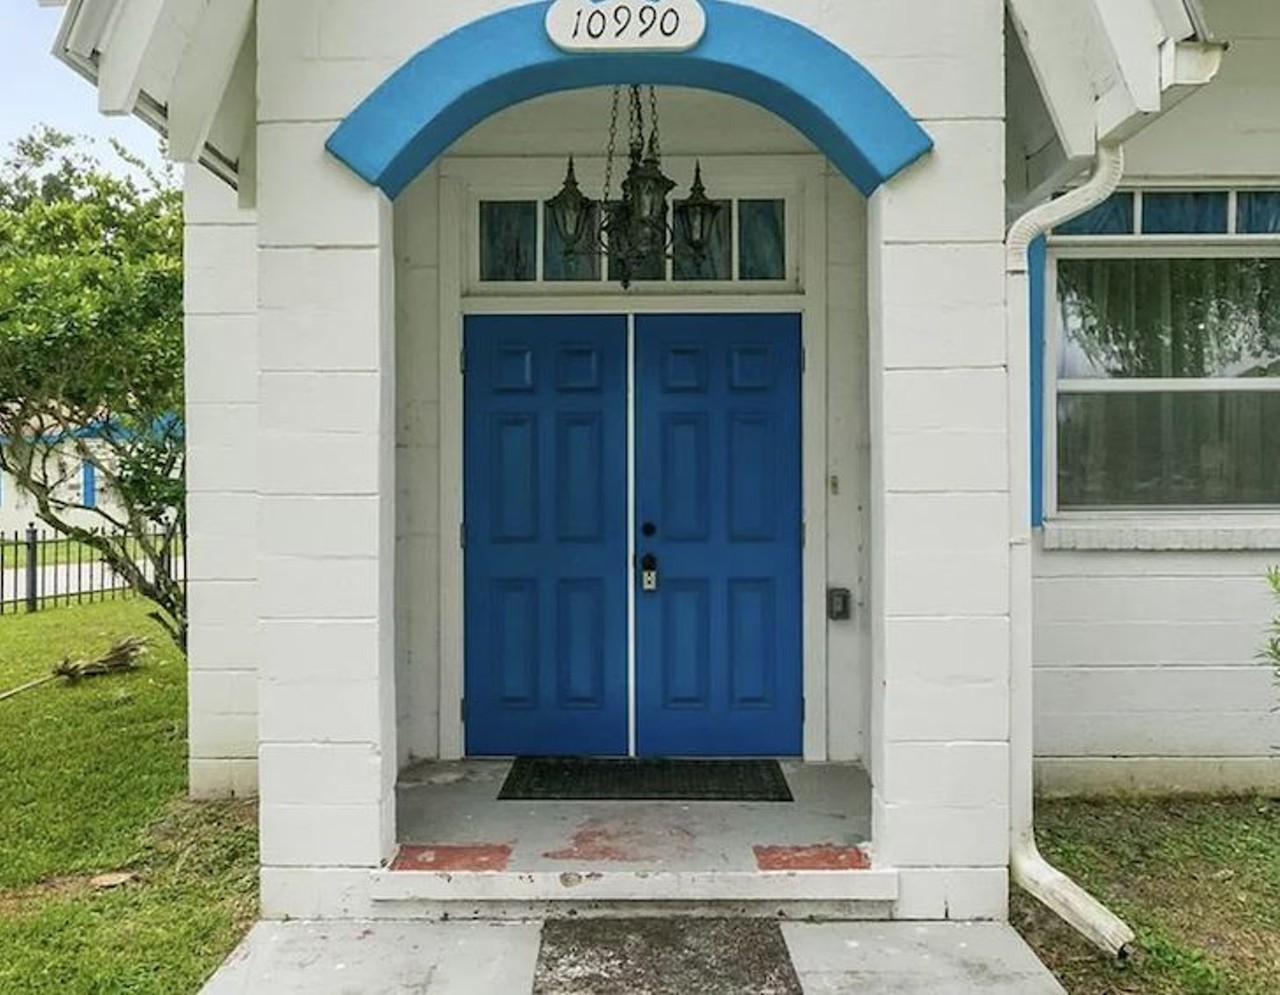 A tiny Florida church was converted into a house, and now it's for sale